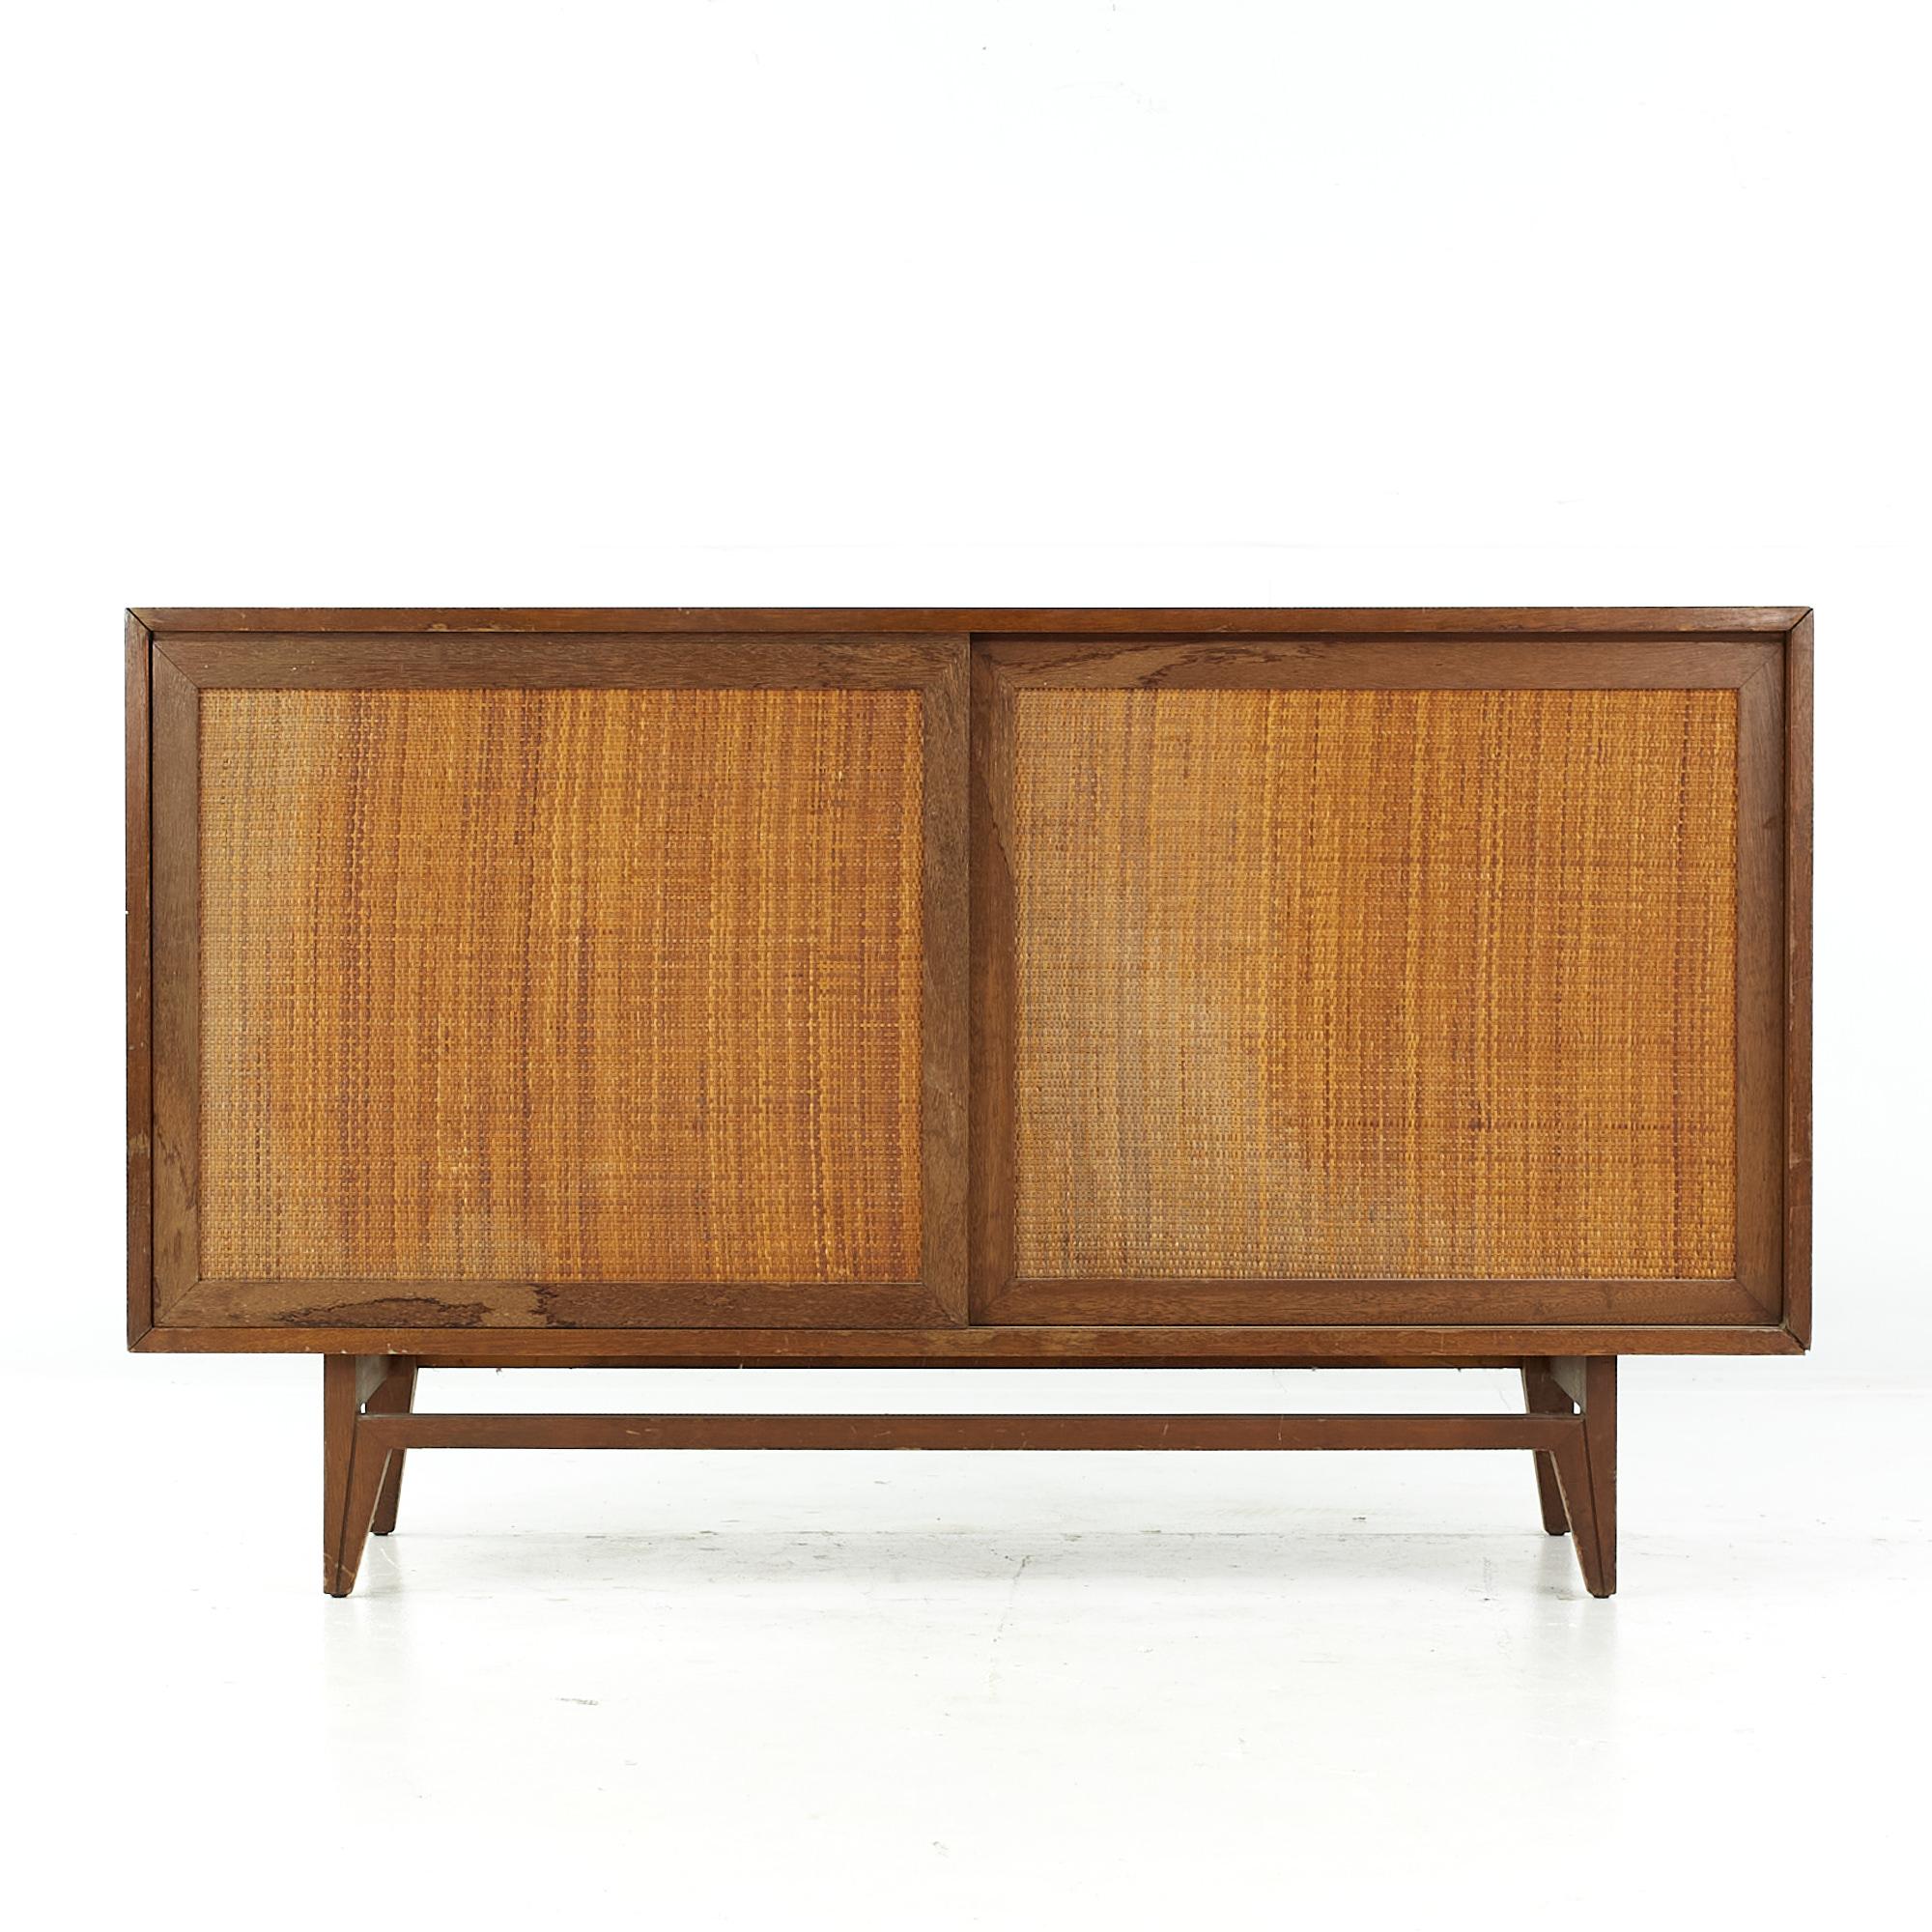 John Keal for Brown Saltman midcentury cane lowboy.

This lowboy measures: 54 wide x 18 deep x 32 inches high.

All pieces of furniture can be had in what we call restored vintage condition. That means the piece is restored upon purchase so it’s